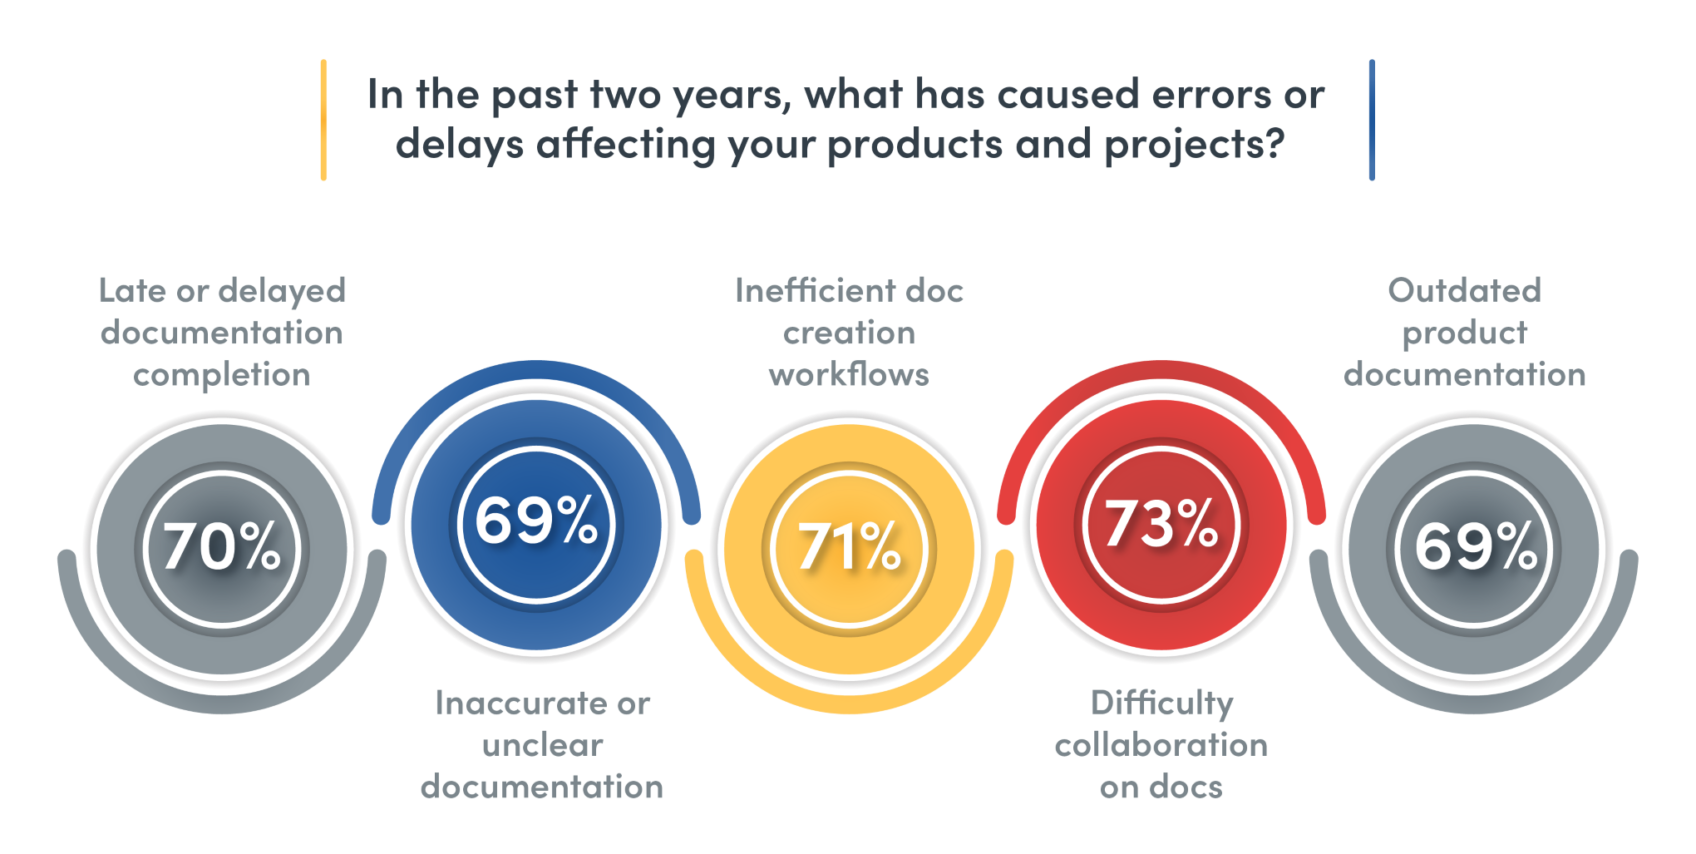 Manufacturing firms are suffering missed sales and product delays due to poor documentation workflows